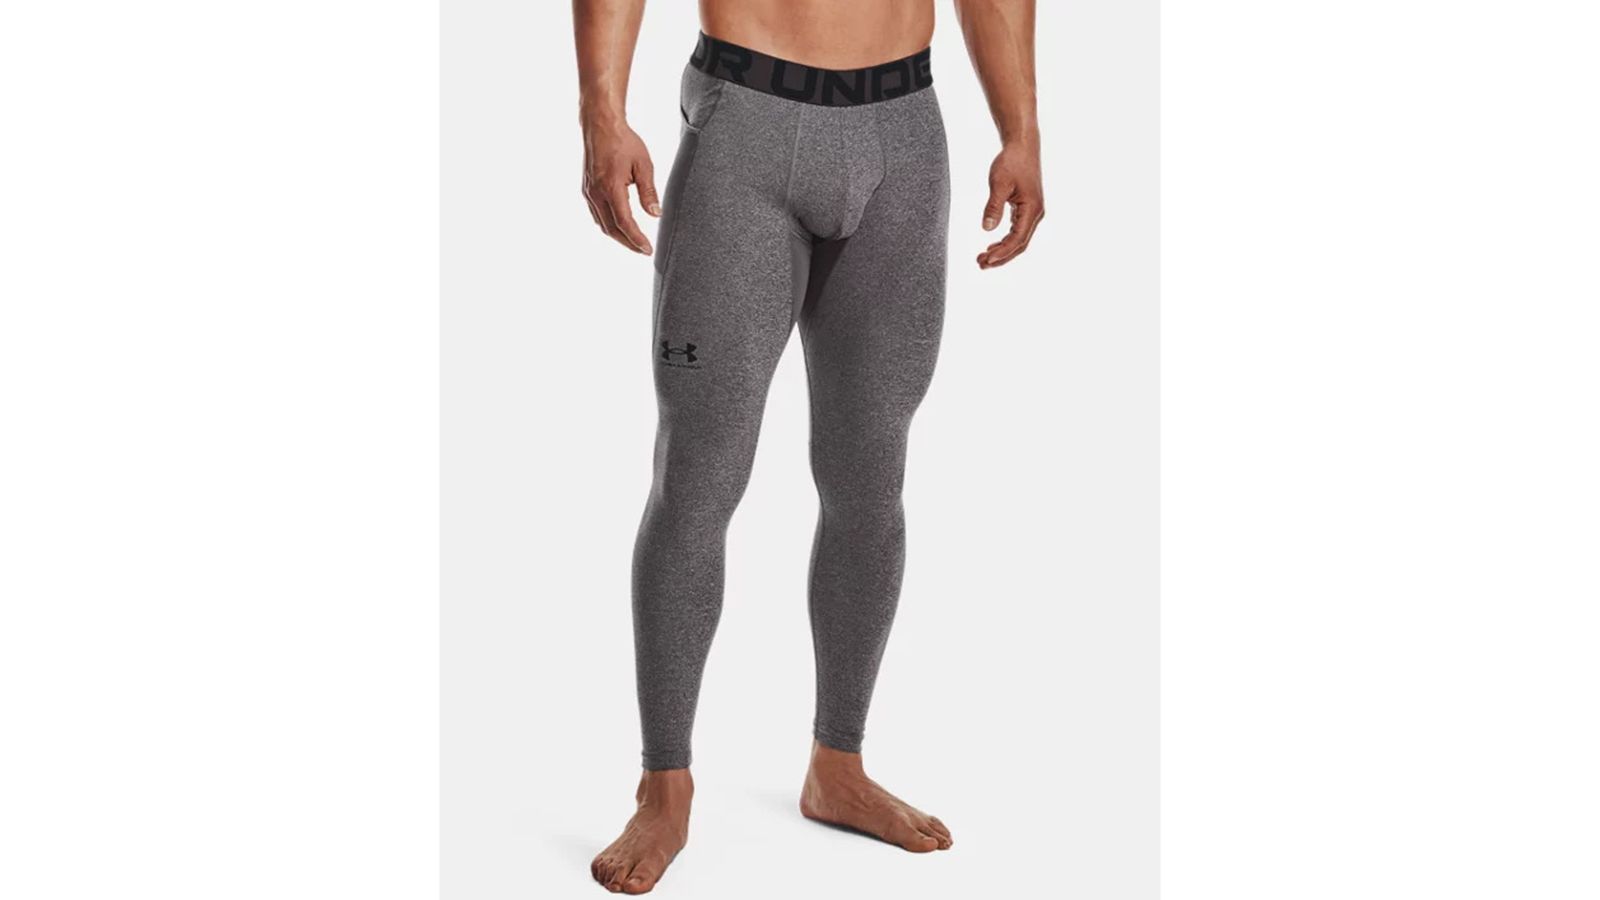 Activewear On Sale At Under Armour: Top Picks For Early Fall - The